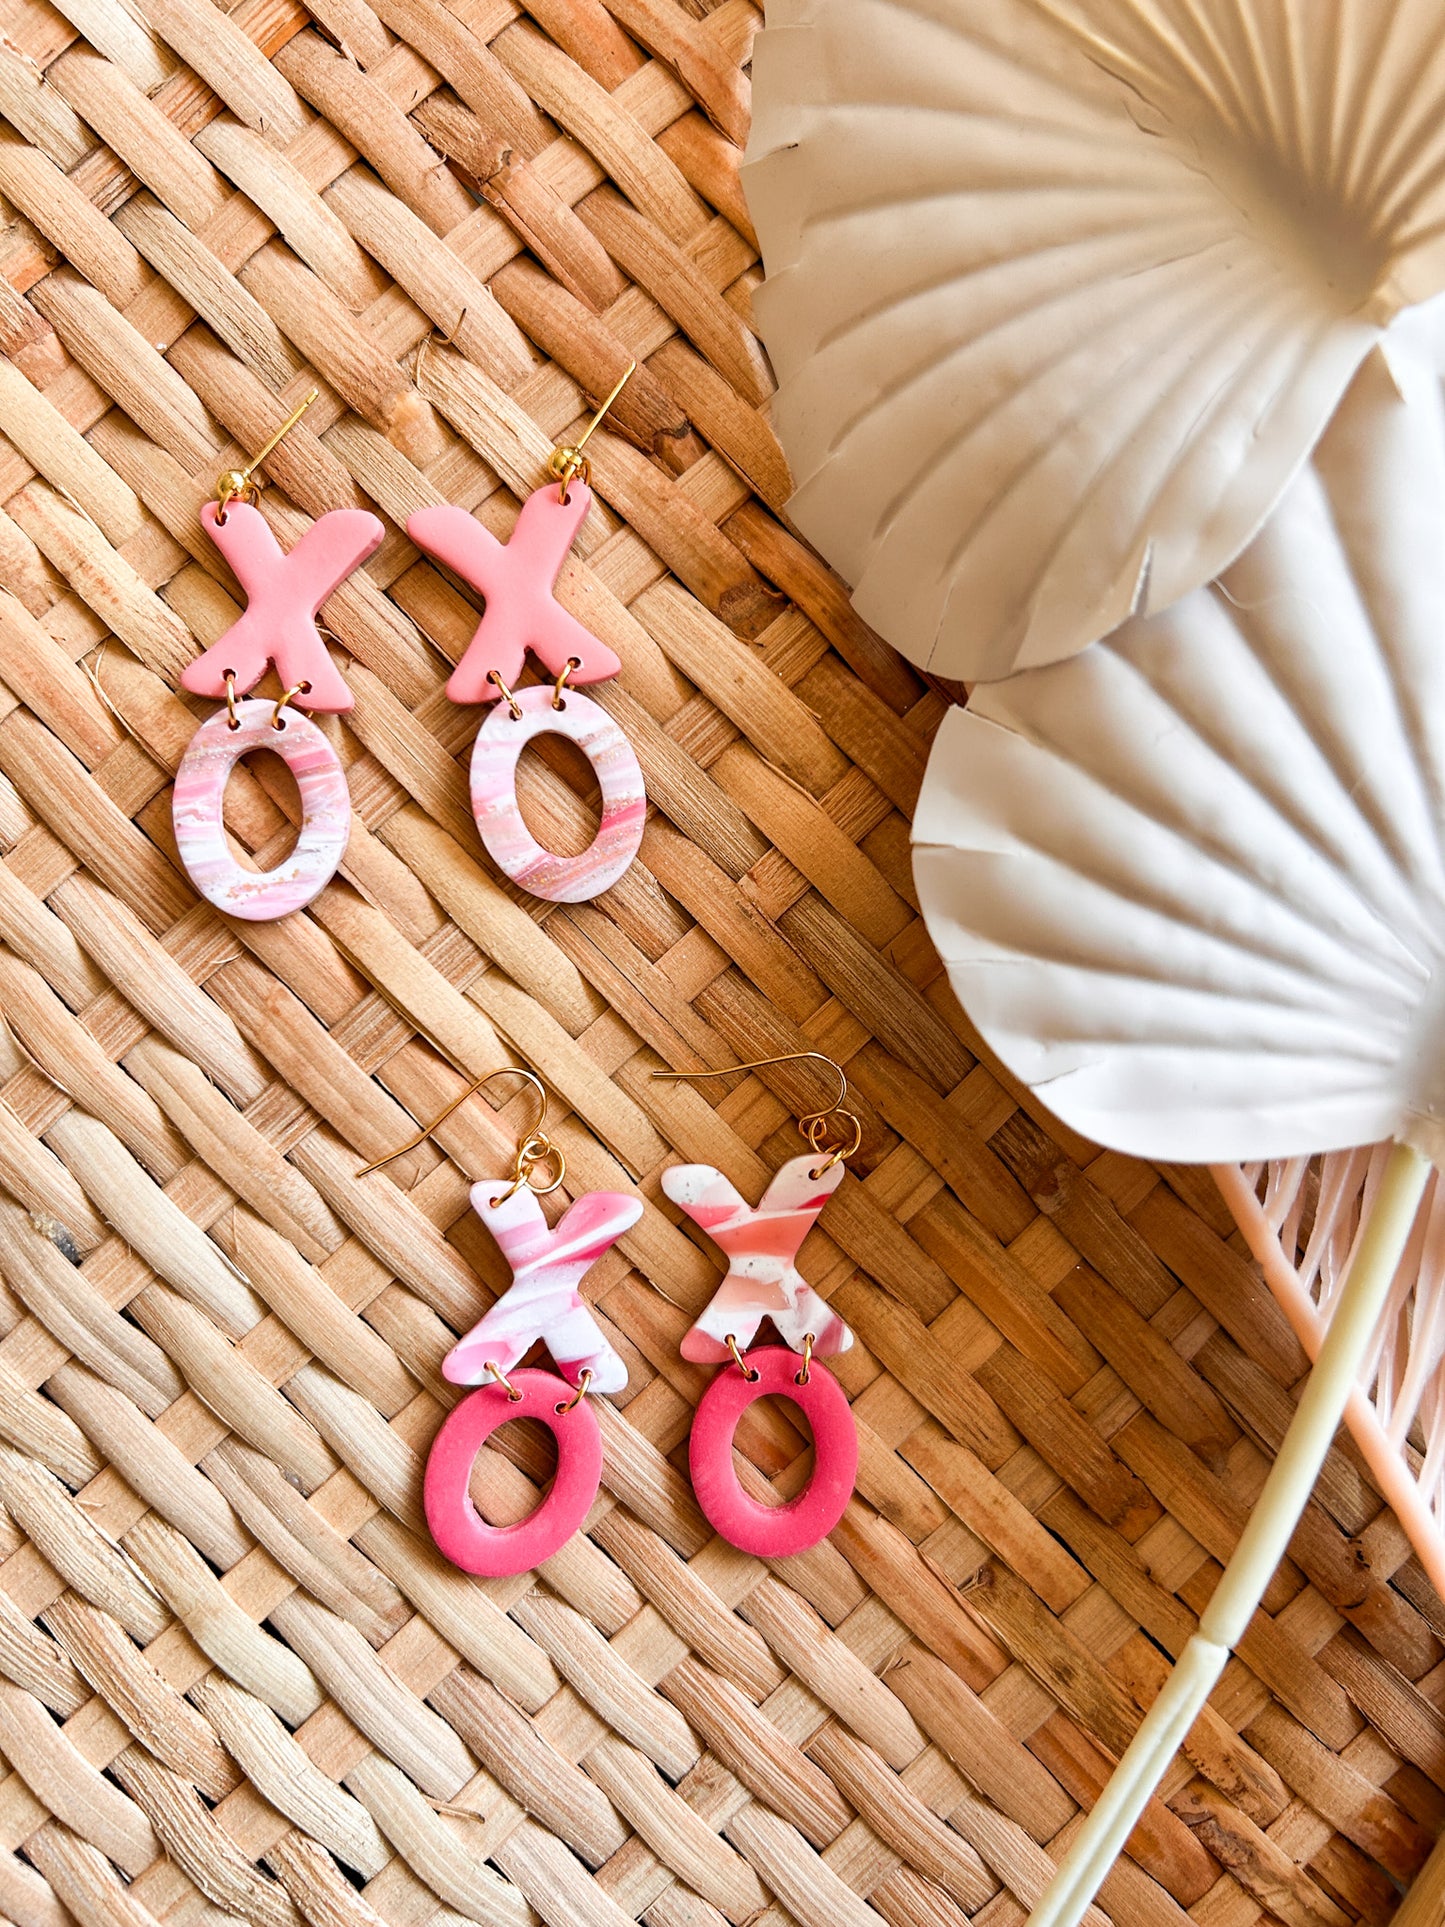 XOXO Kisses Clay Dangle Earrings | Stained Glass Style Earrings | Valentine's Day Earrings | Clay Earrings  | Lightweight